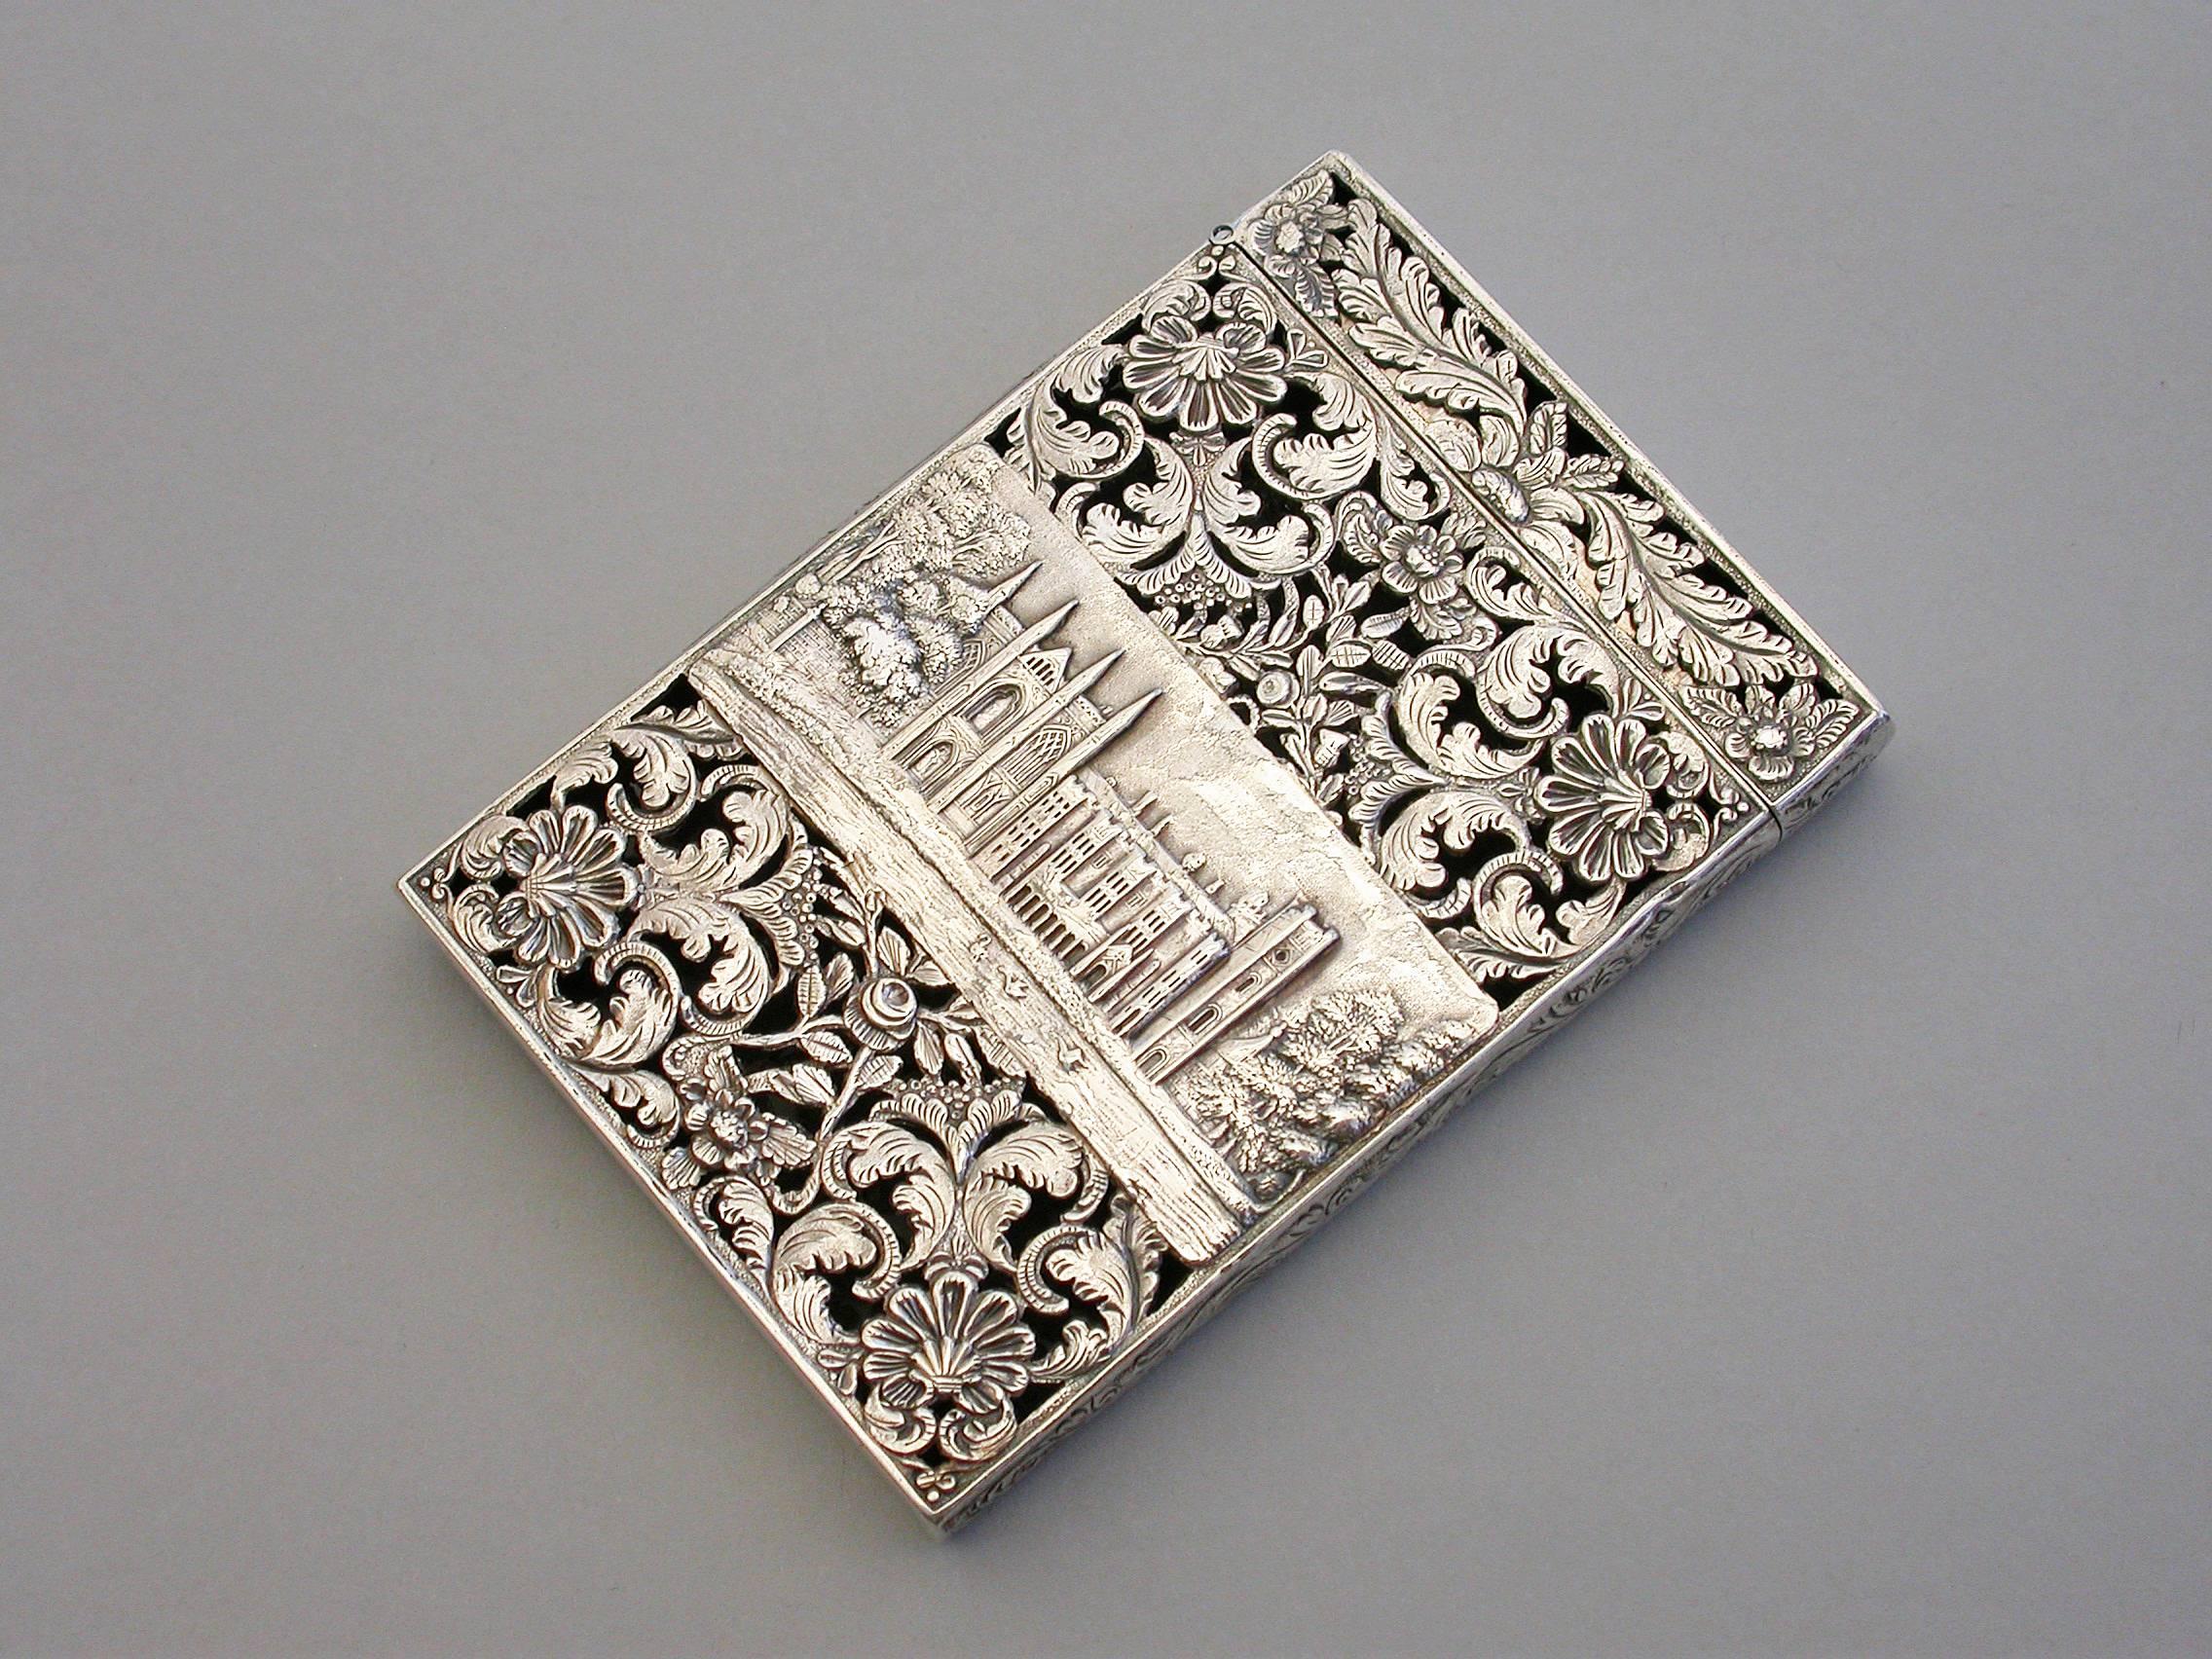 English William IV Silver Castle Top Card Case Newstead Abbey with Lord Byron Medallion